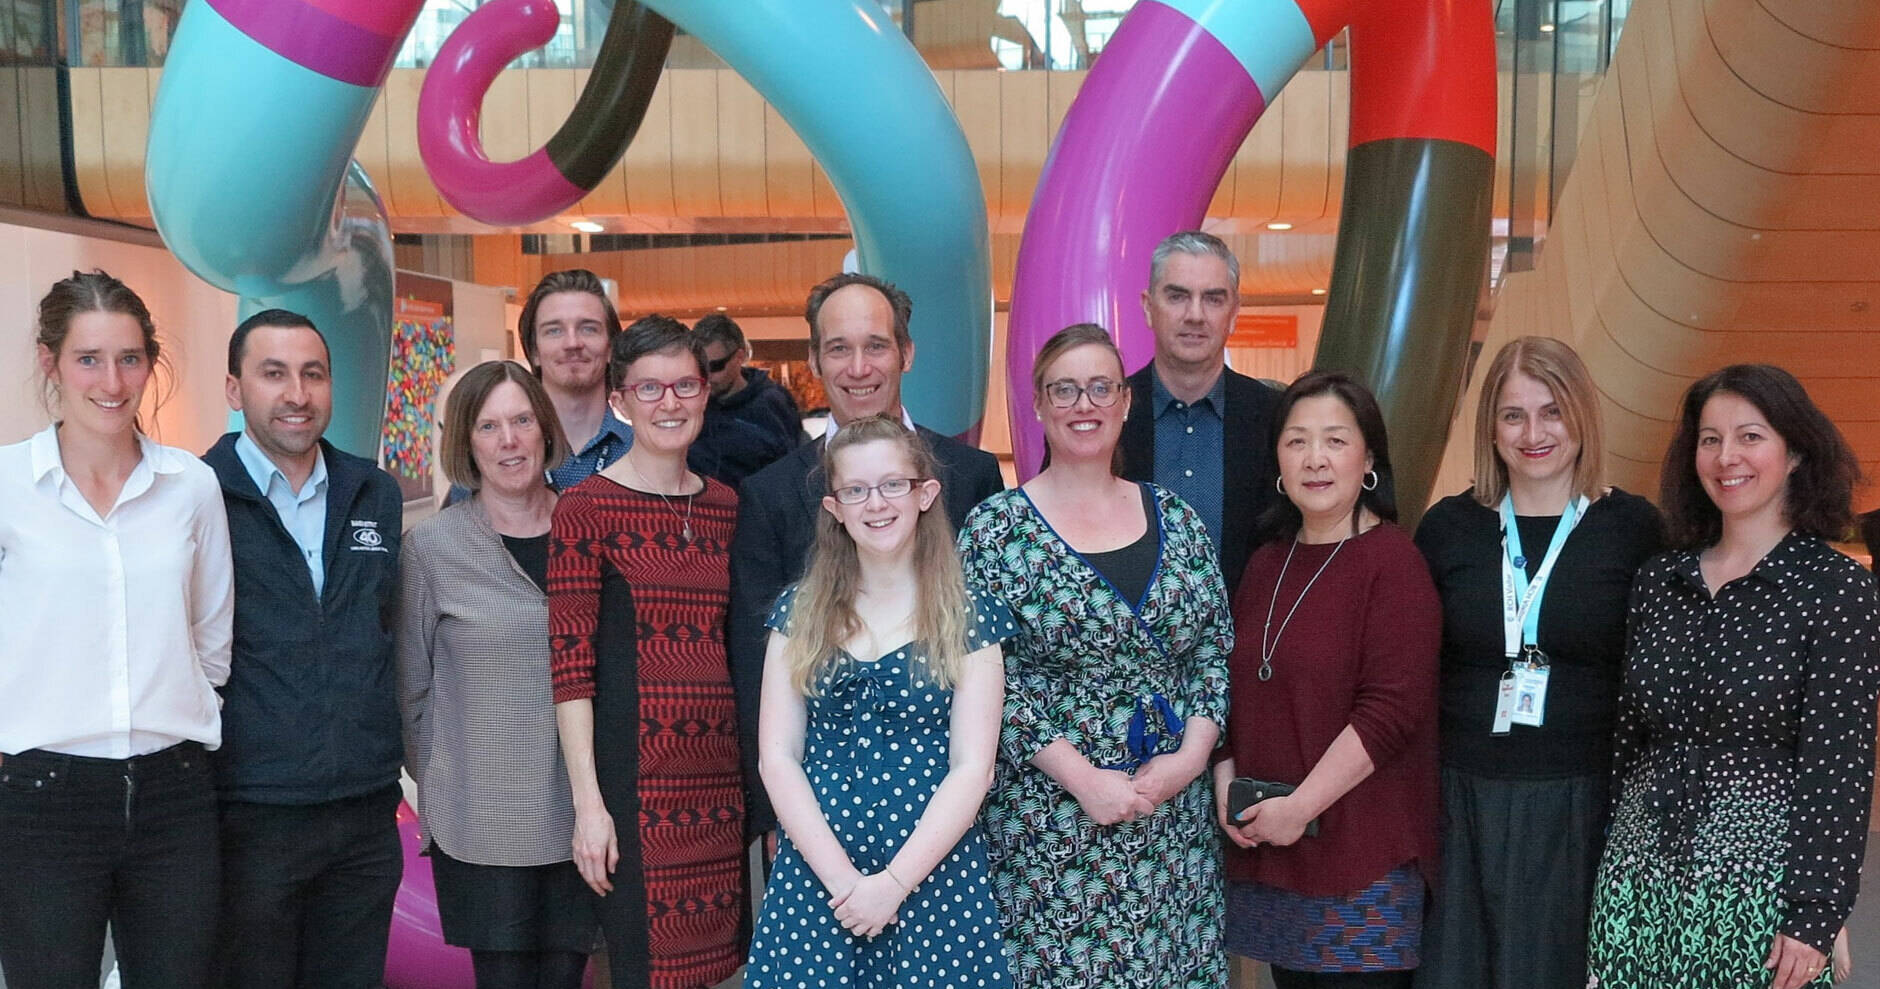 Image Photo ExxonMobil Australia staff, The Royal Children's Hospital staff and ChIPS members at the hospital visit in September 2018.